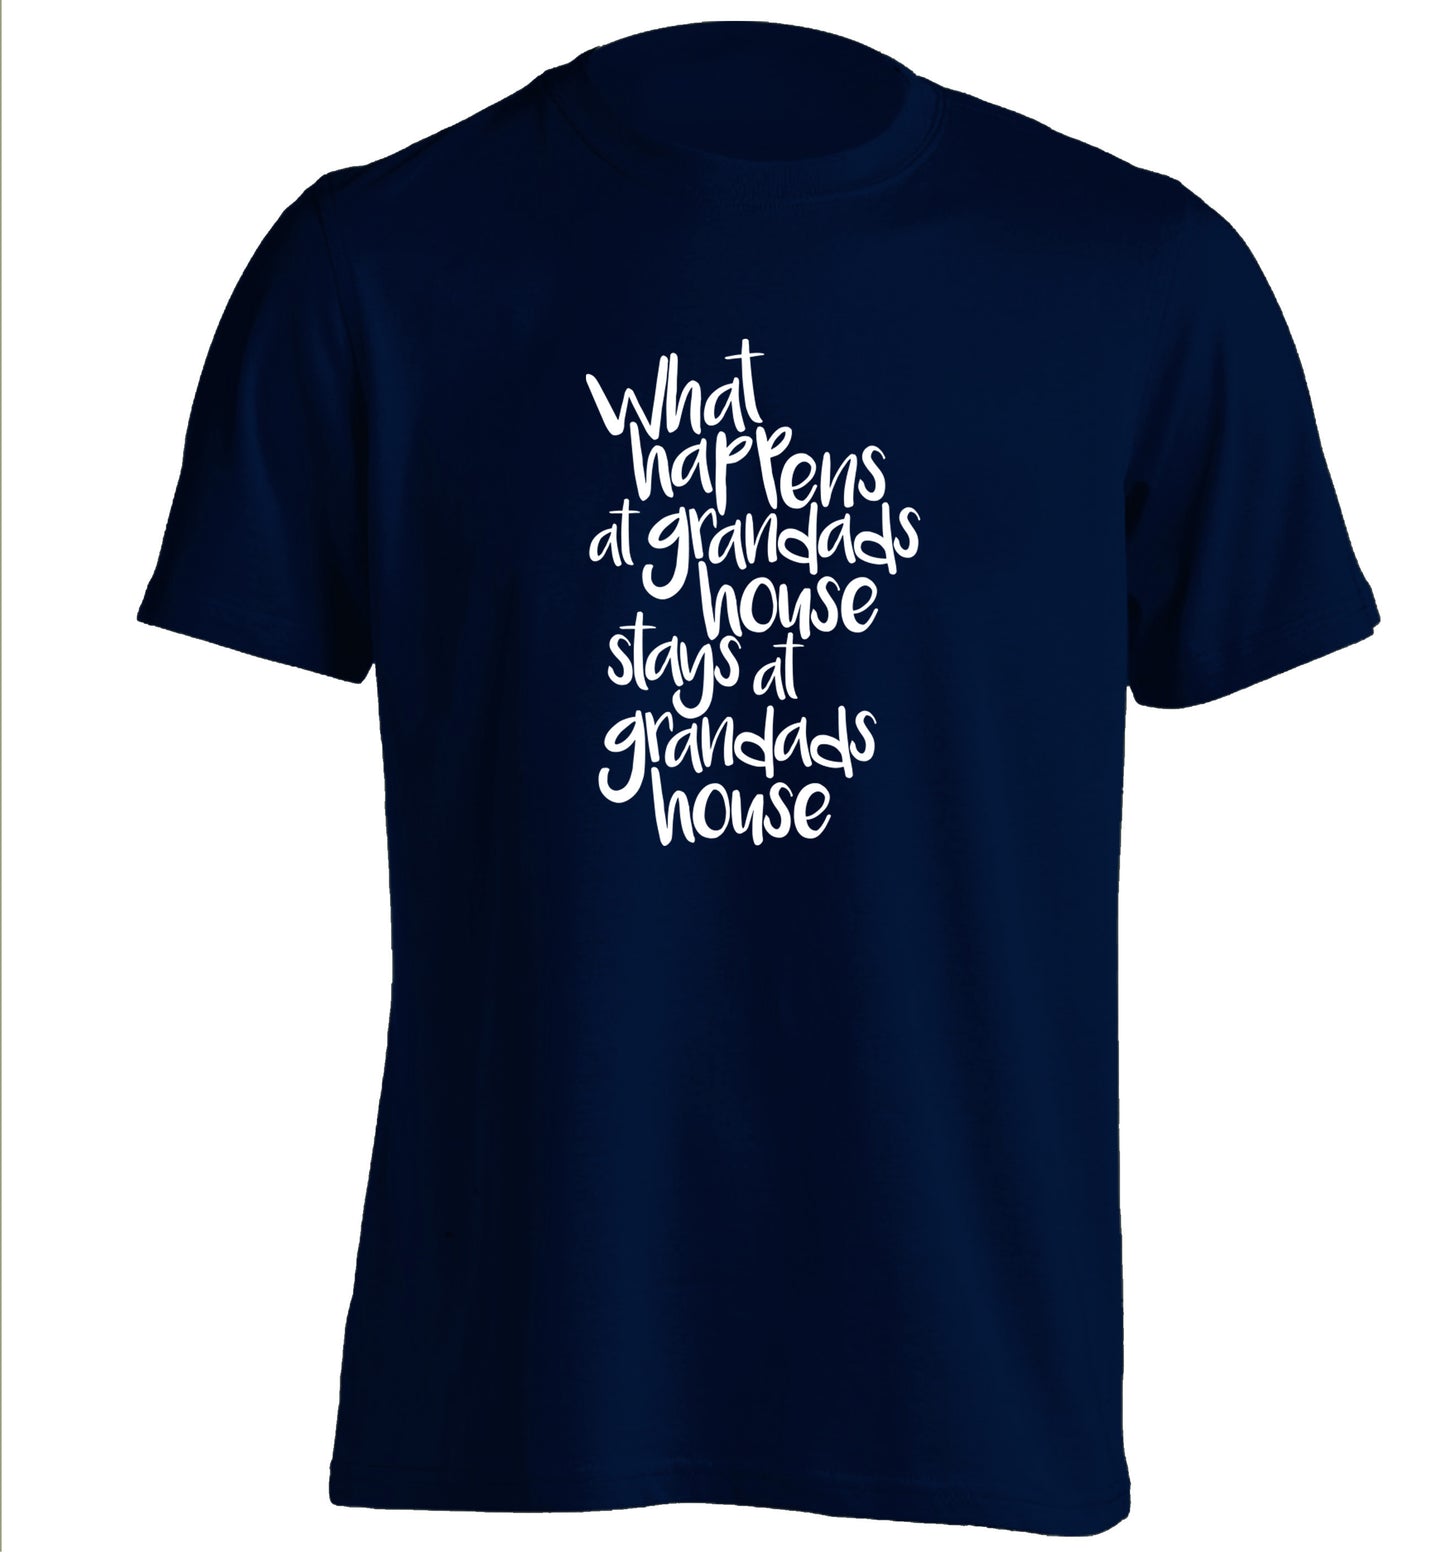 What happens at grandads house stays at grandads house adults unisex navy Tshirt 2XL